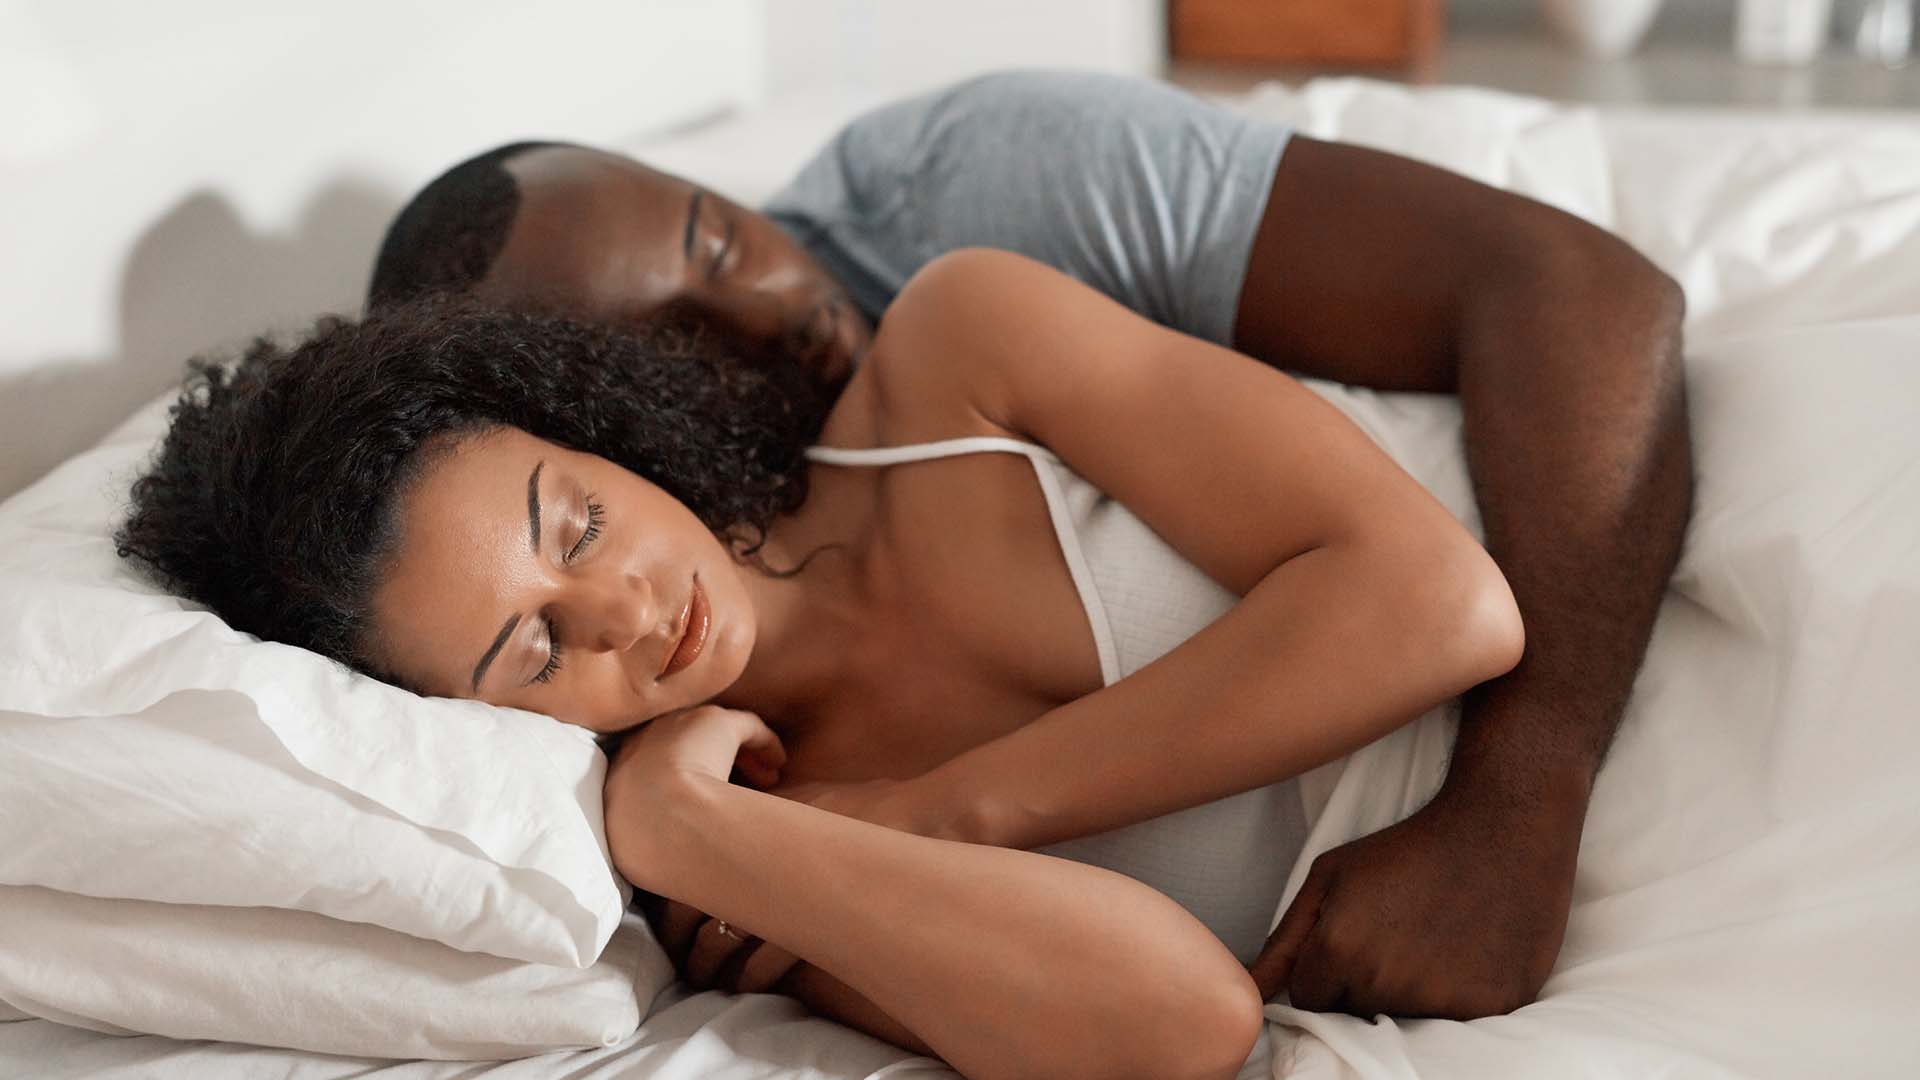 Two people lie next to each other in bed